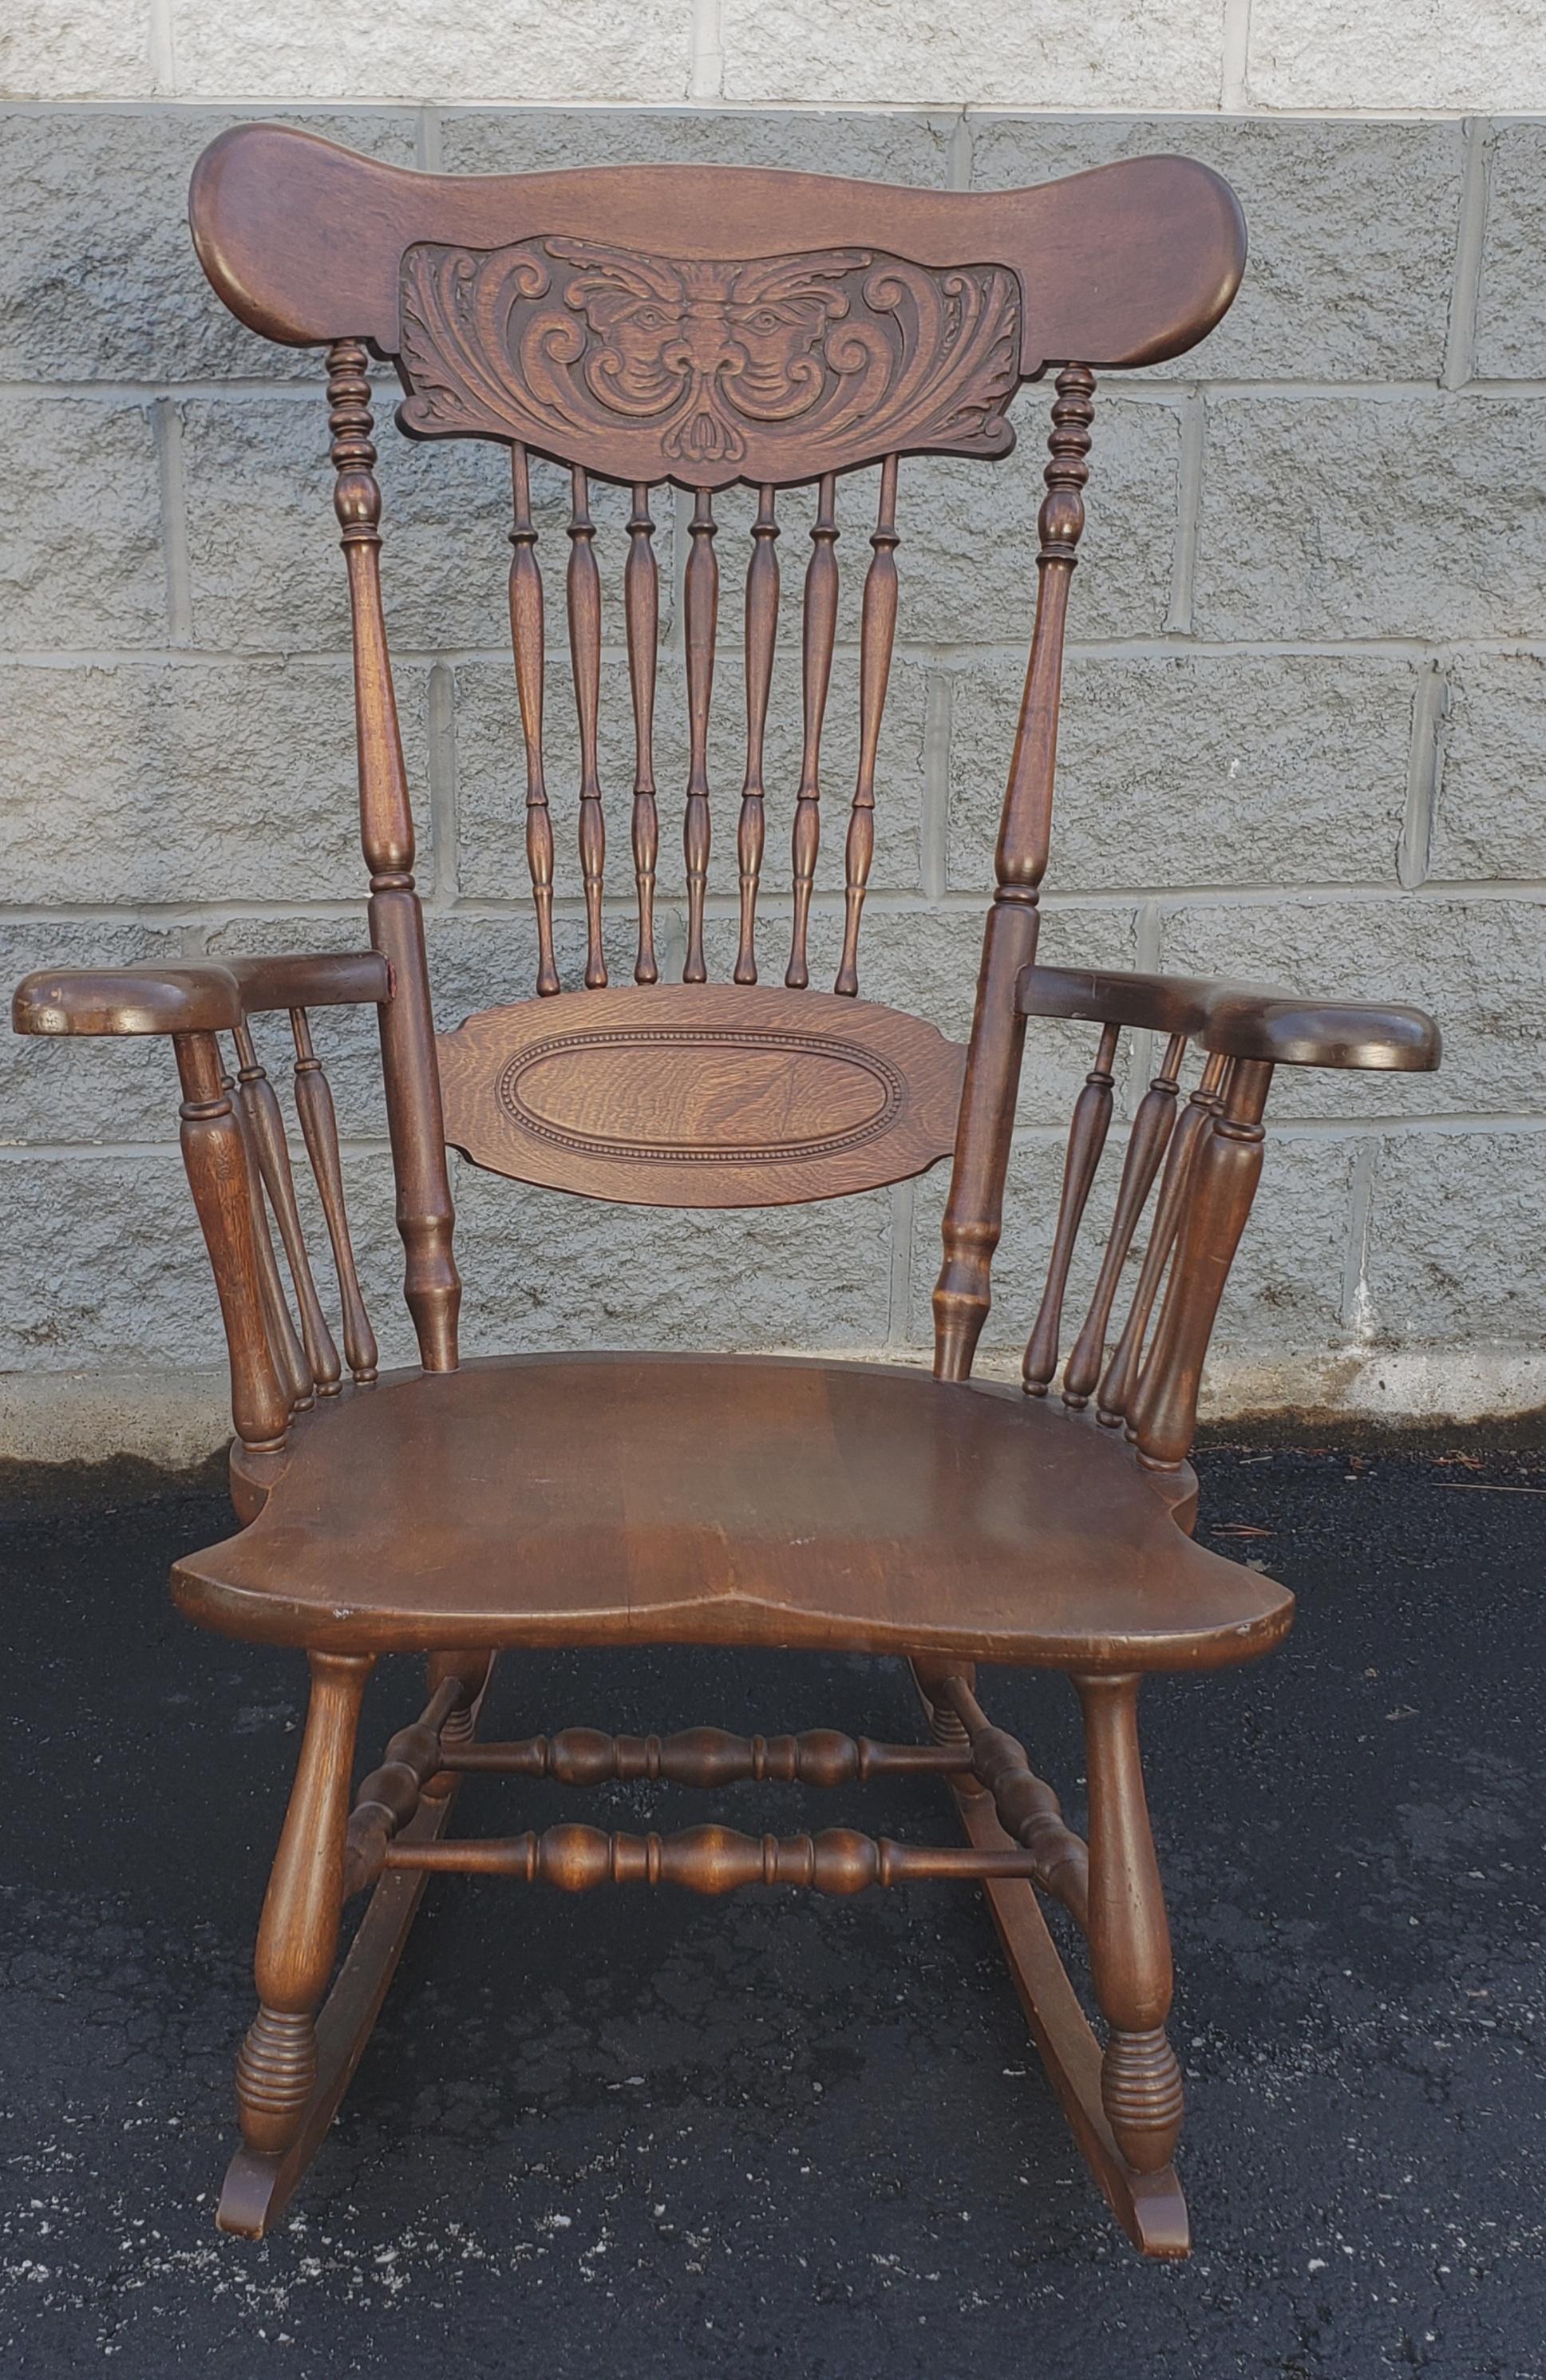 1950s Anglo Inglo-Indian carved walnut rocking chairs with hand carved indian figure on back.
Measures 27